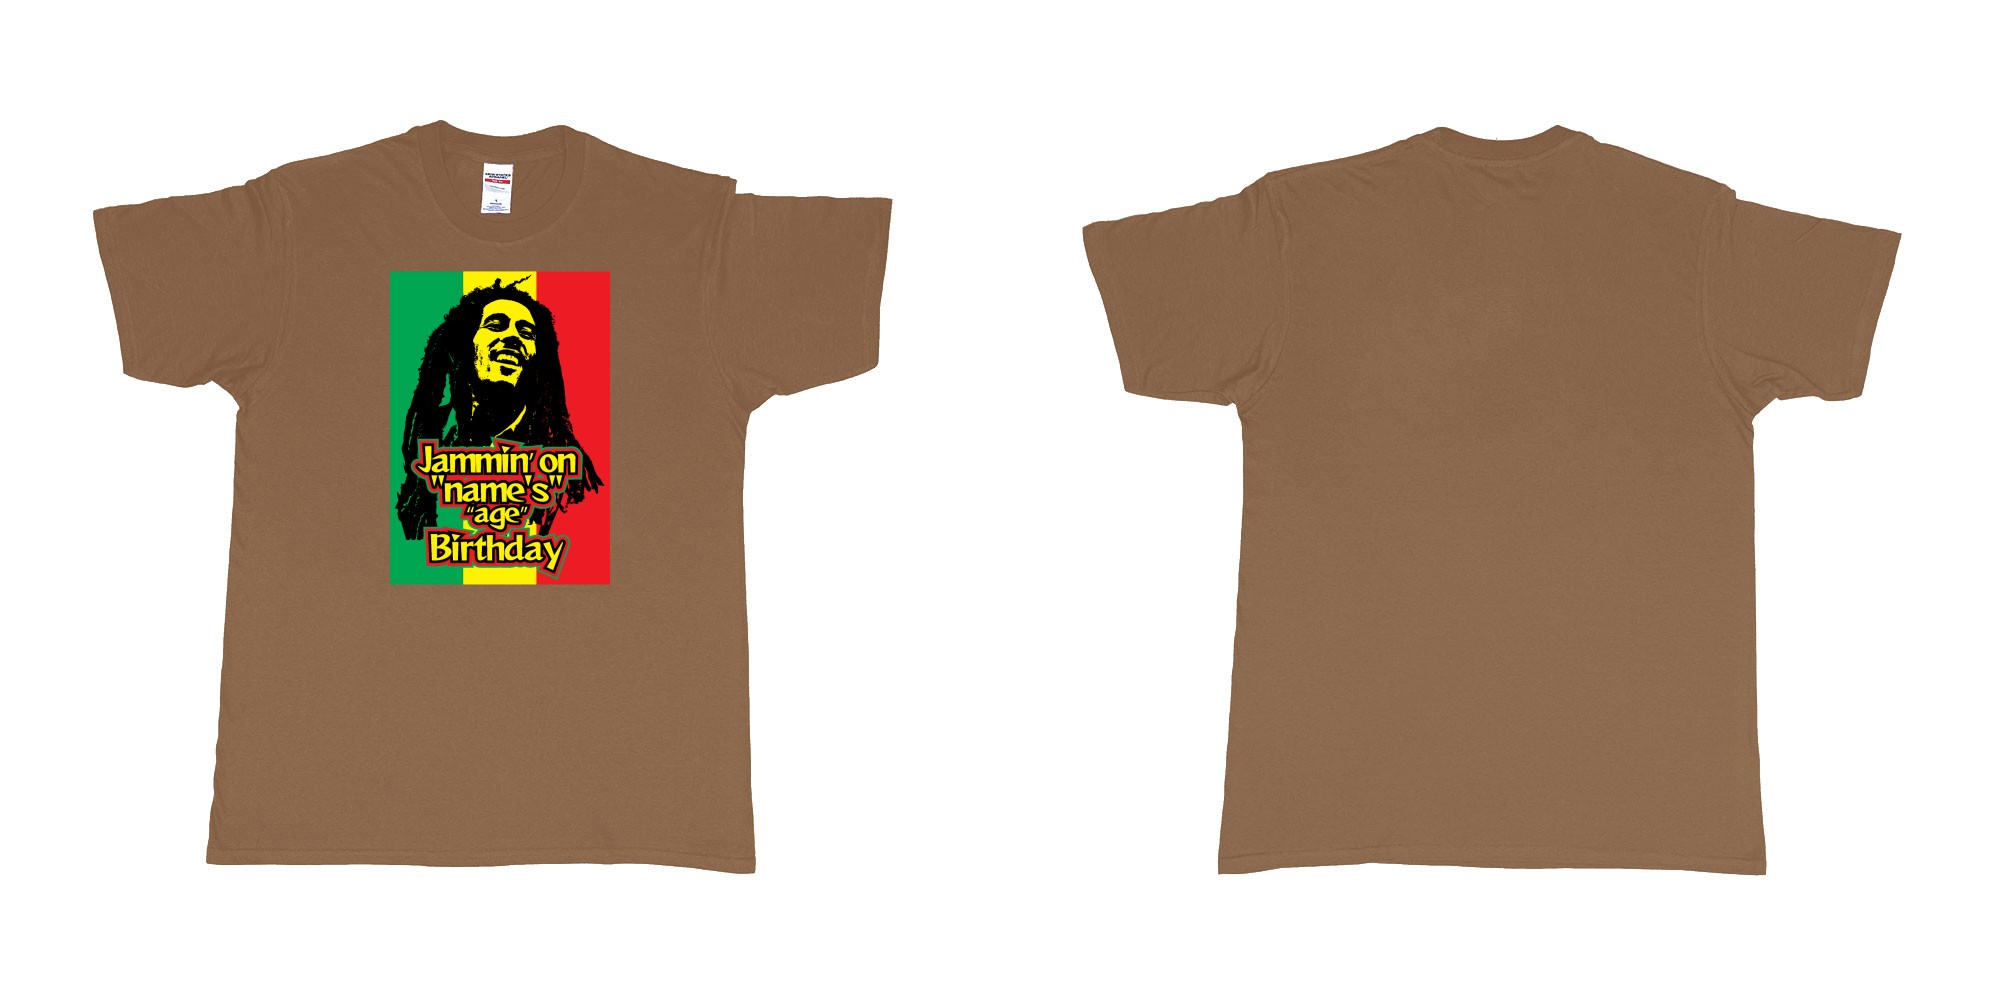 Custom tshirt design bob marley jammin on custom names birthday in fabric color chestnut choice your own text made in Bali by The Pirate Way